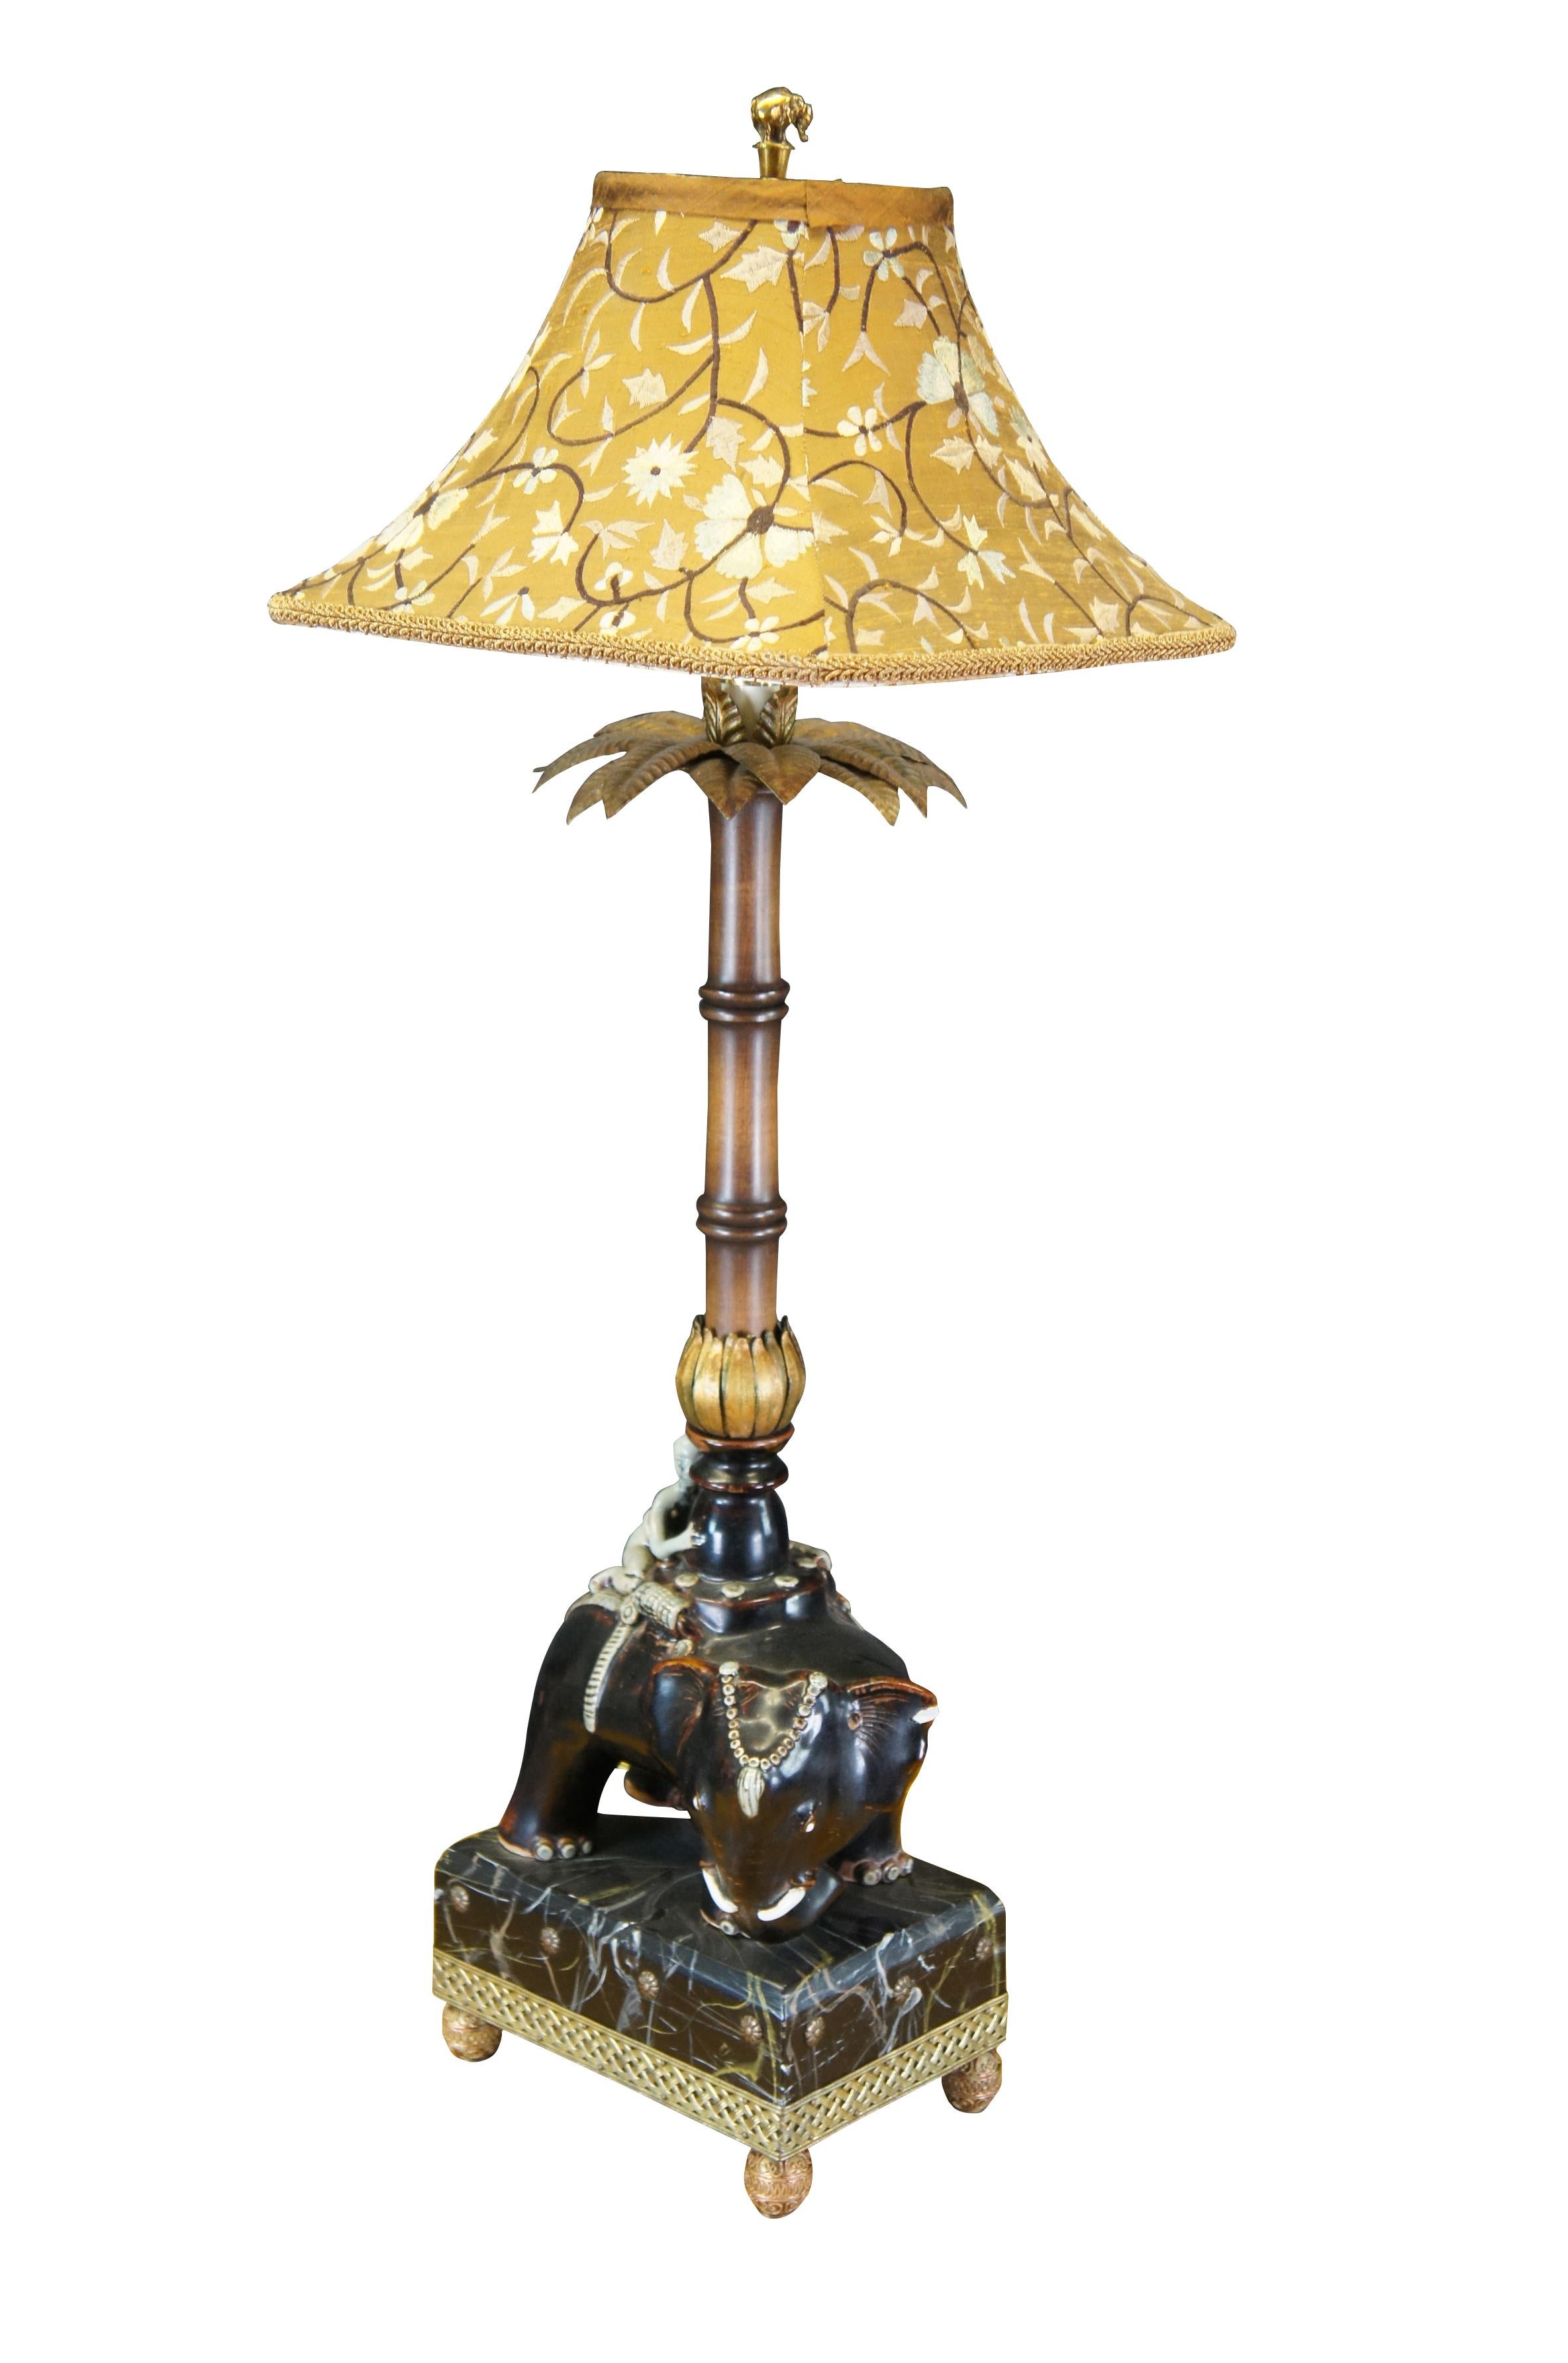 2 Raymond Waites For Tyndale (a division of Frederick Cooper) Oriental Table Lamps.  Features a true pair, (facing or apposing) Asian glazed elephants saddled with riders over a faux marbled beveled and filigree brass footed base.  Column is in the